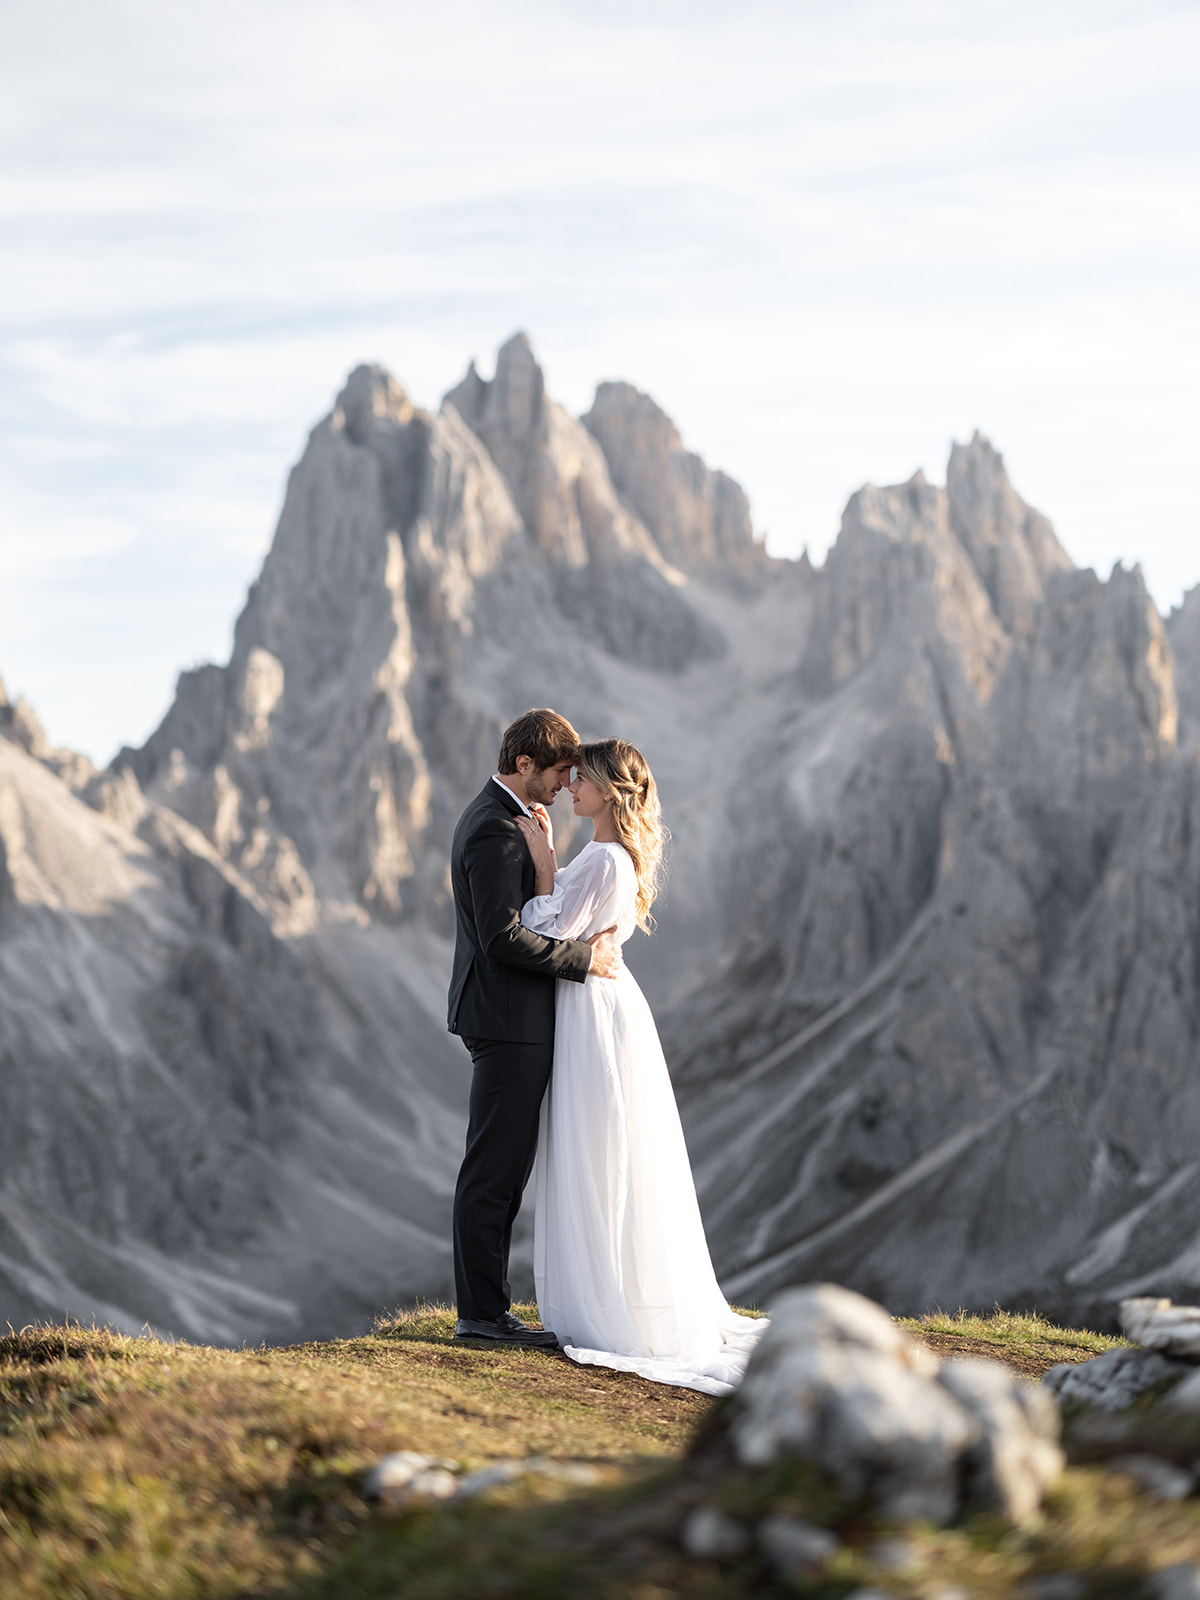 couple kissing with the dolomites in the background during their wedding day 